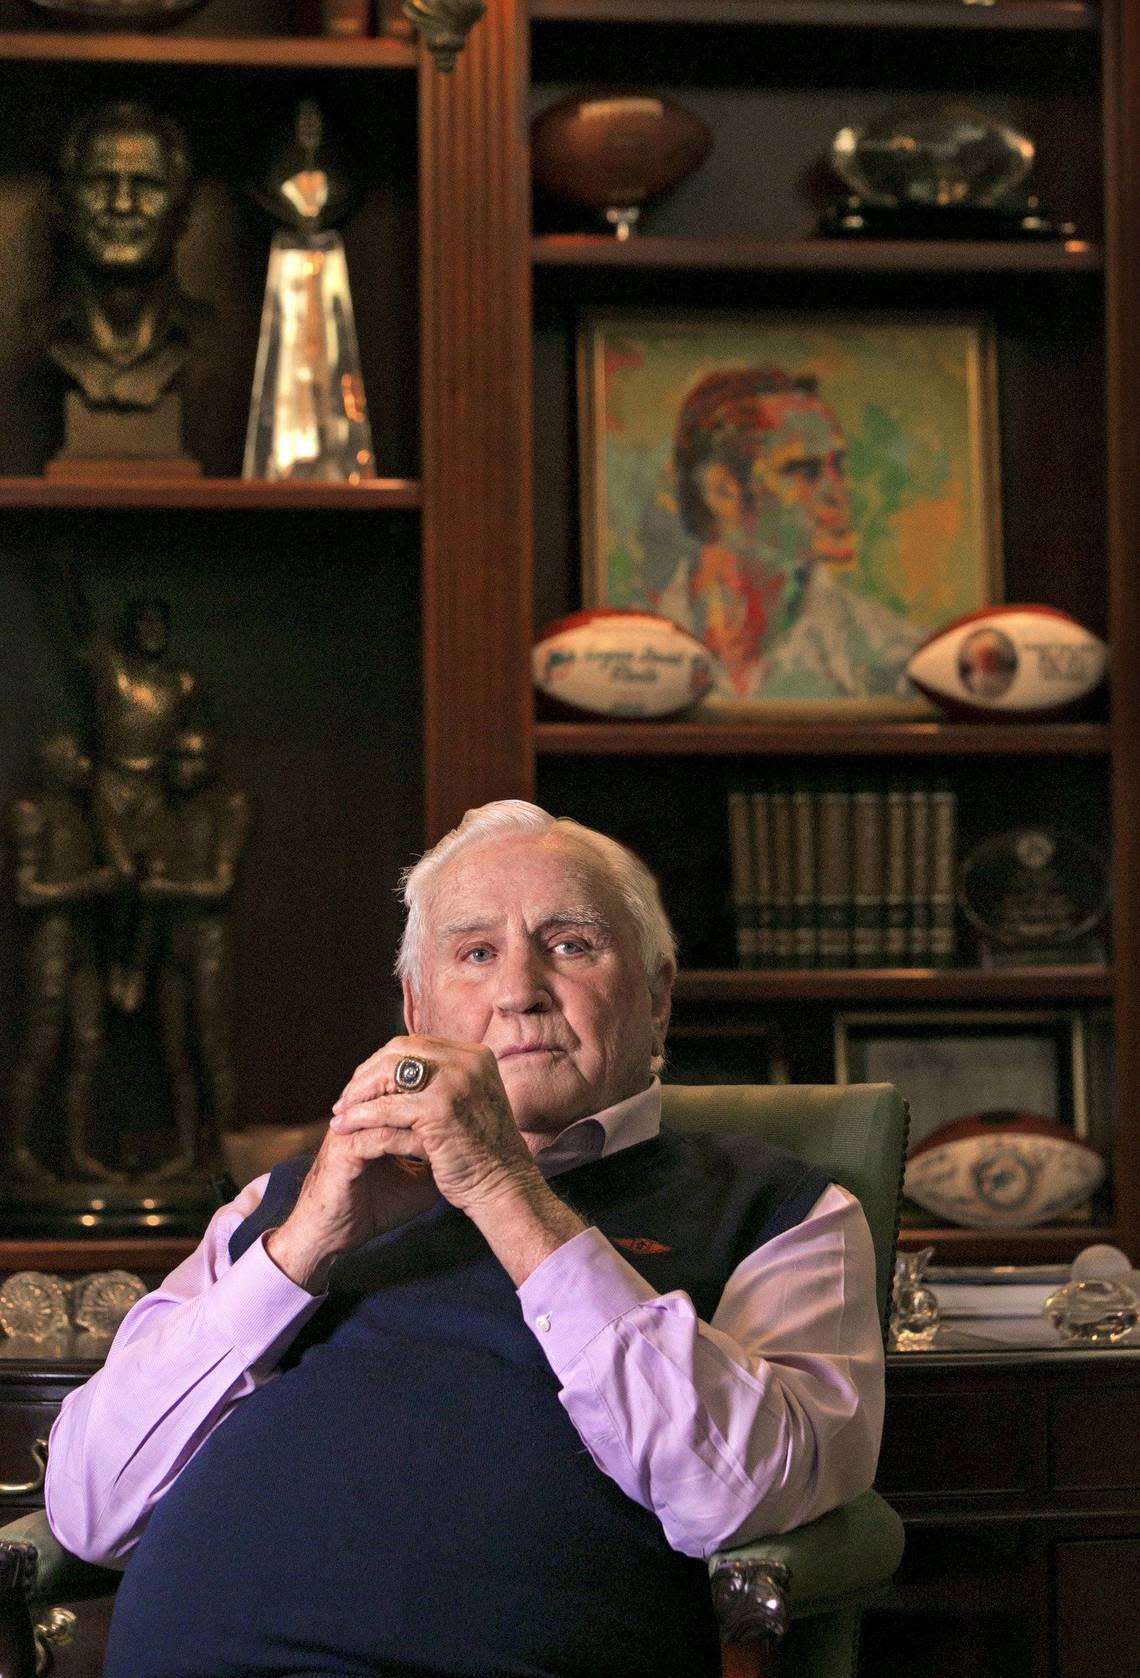 Former Miami Dolphins Coach, Don Shula in his office at his home on Indian Creek Island on Miami Beach on Tuesday, June 2, 2015.